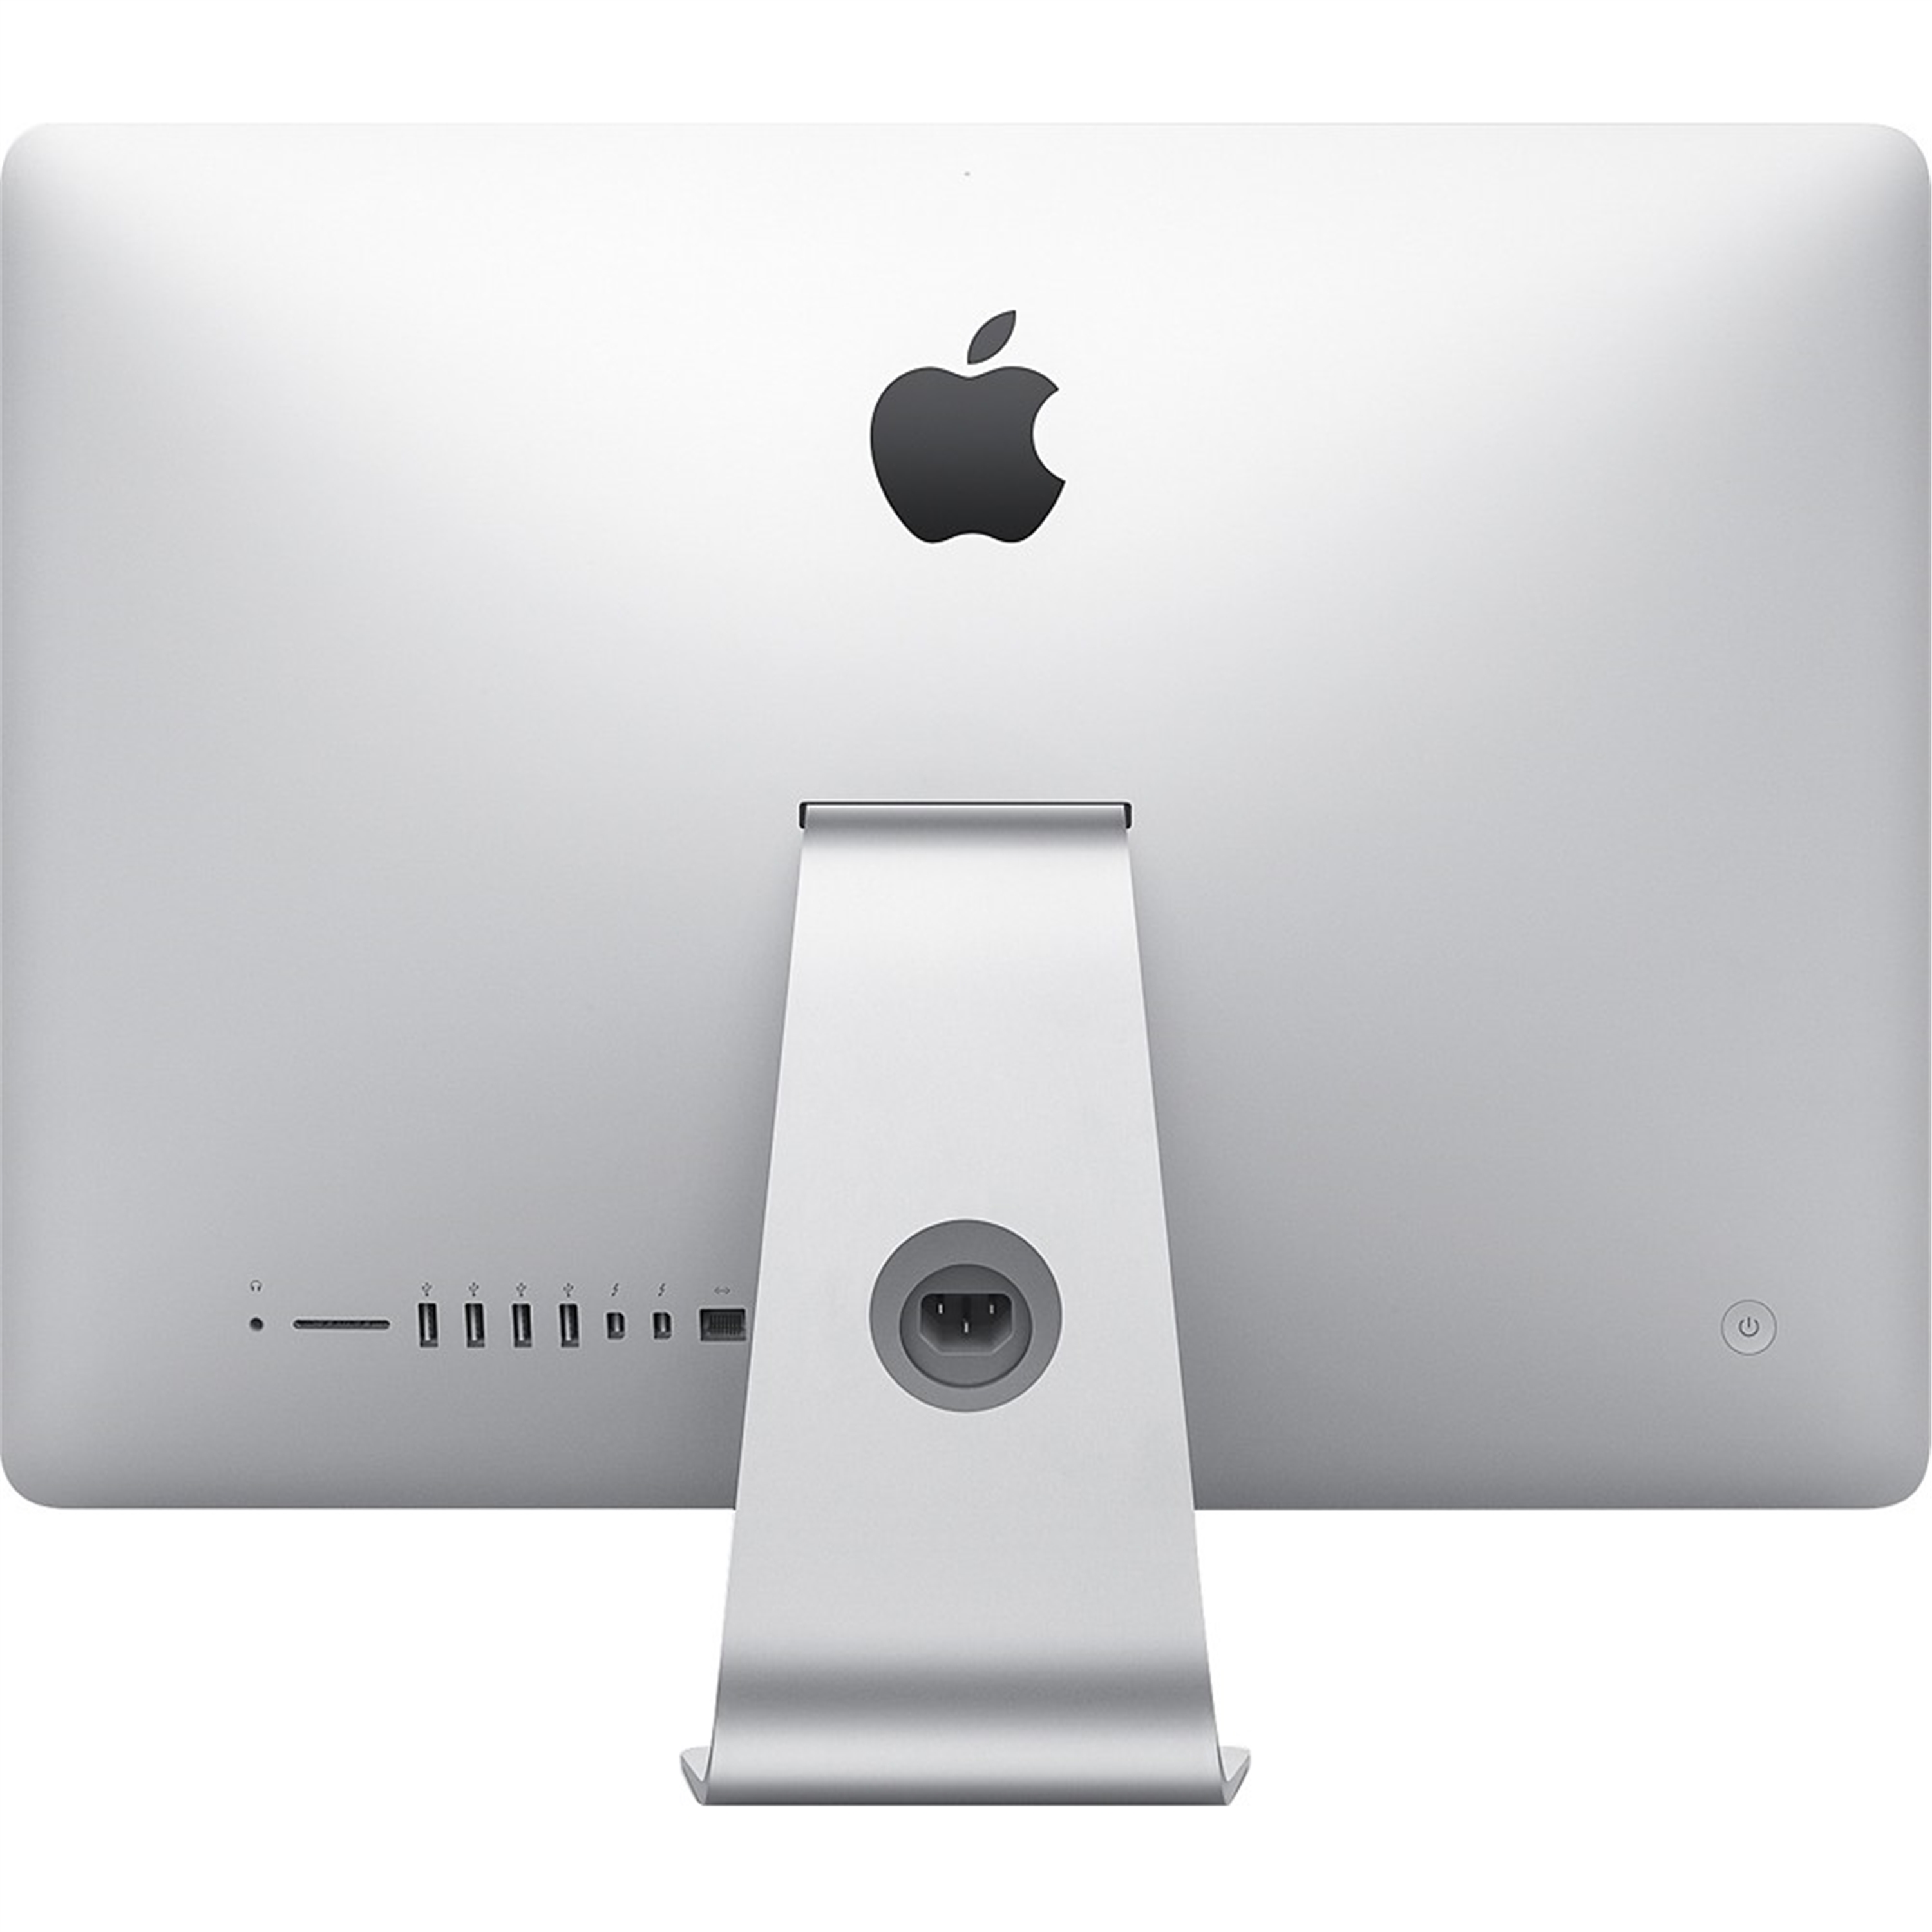 Apple iMac MK142LL/A 21.5" 8GB 1TB Core™ i5-5250U 1.6GHz Mac OSX,&nbsp;Silver (Used) - image 2 of 3